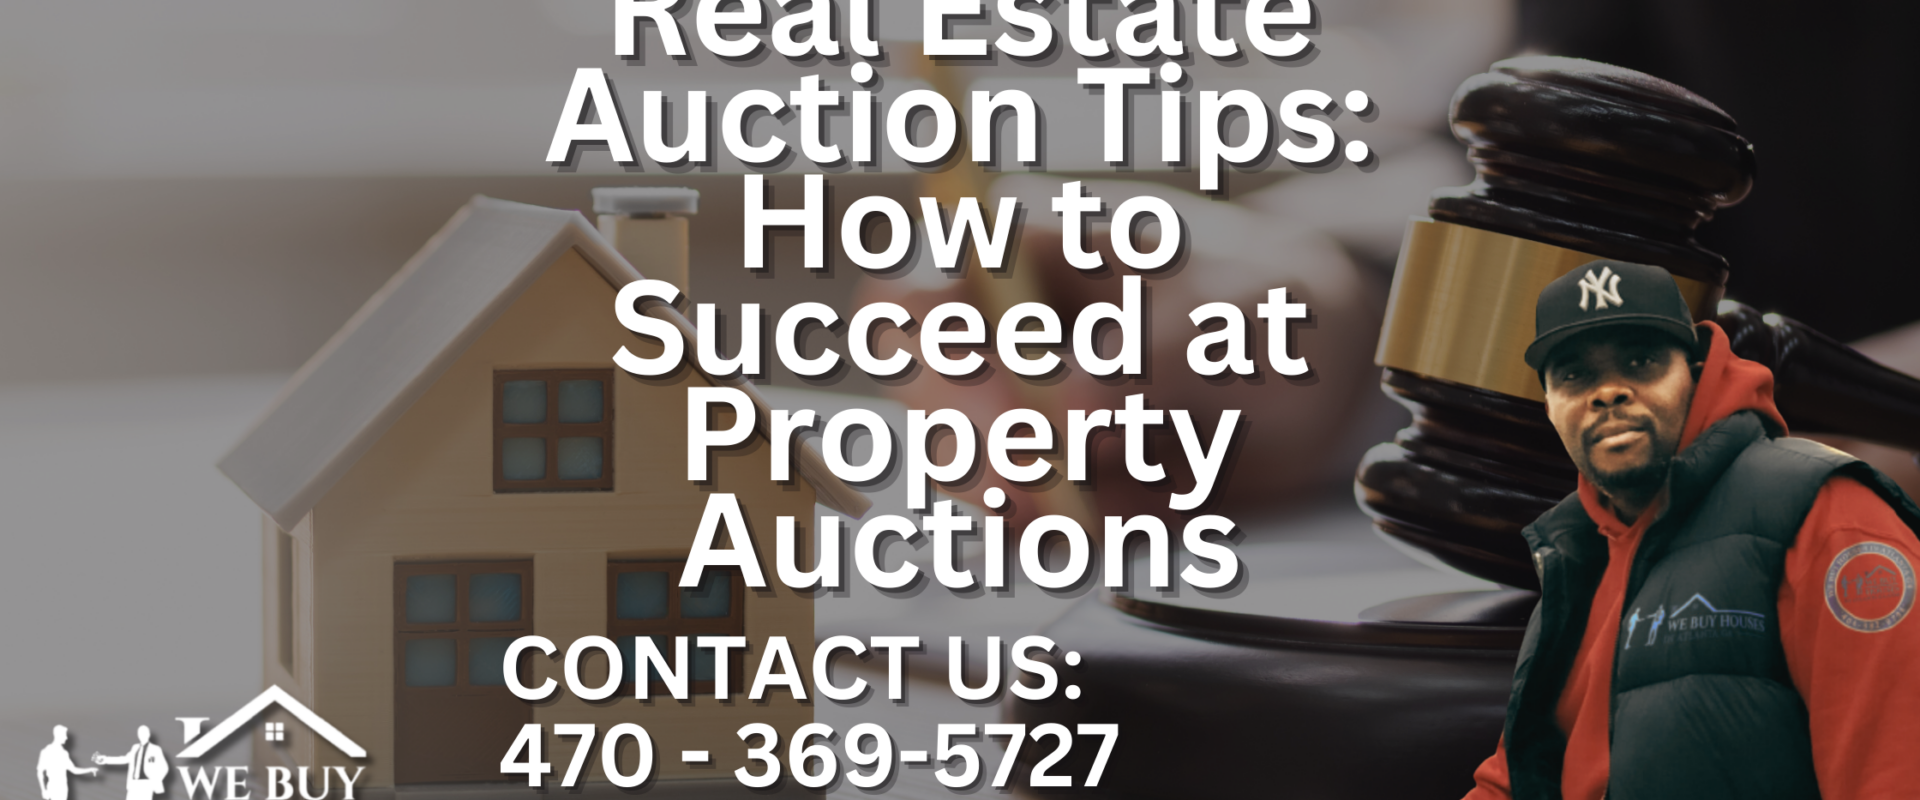 Real Estate Auction Tips: How to Succeed at Property Auctions